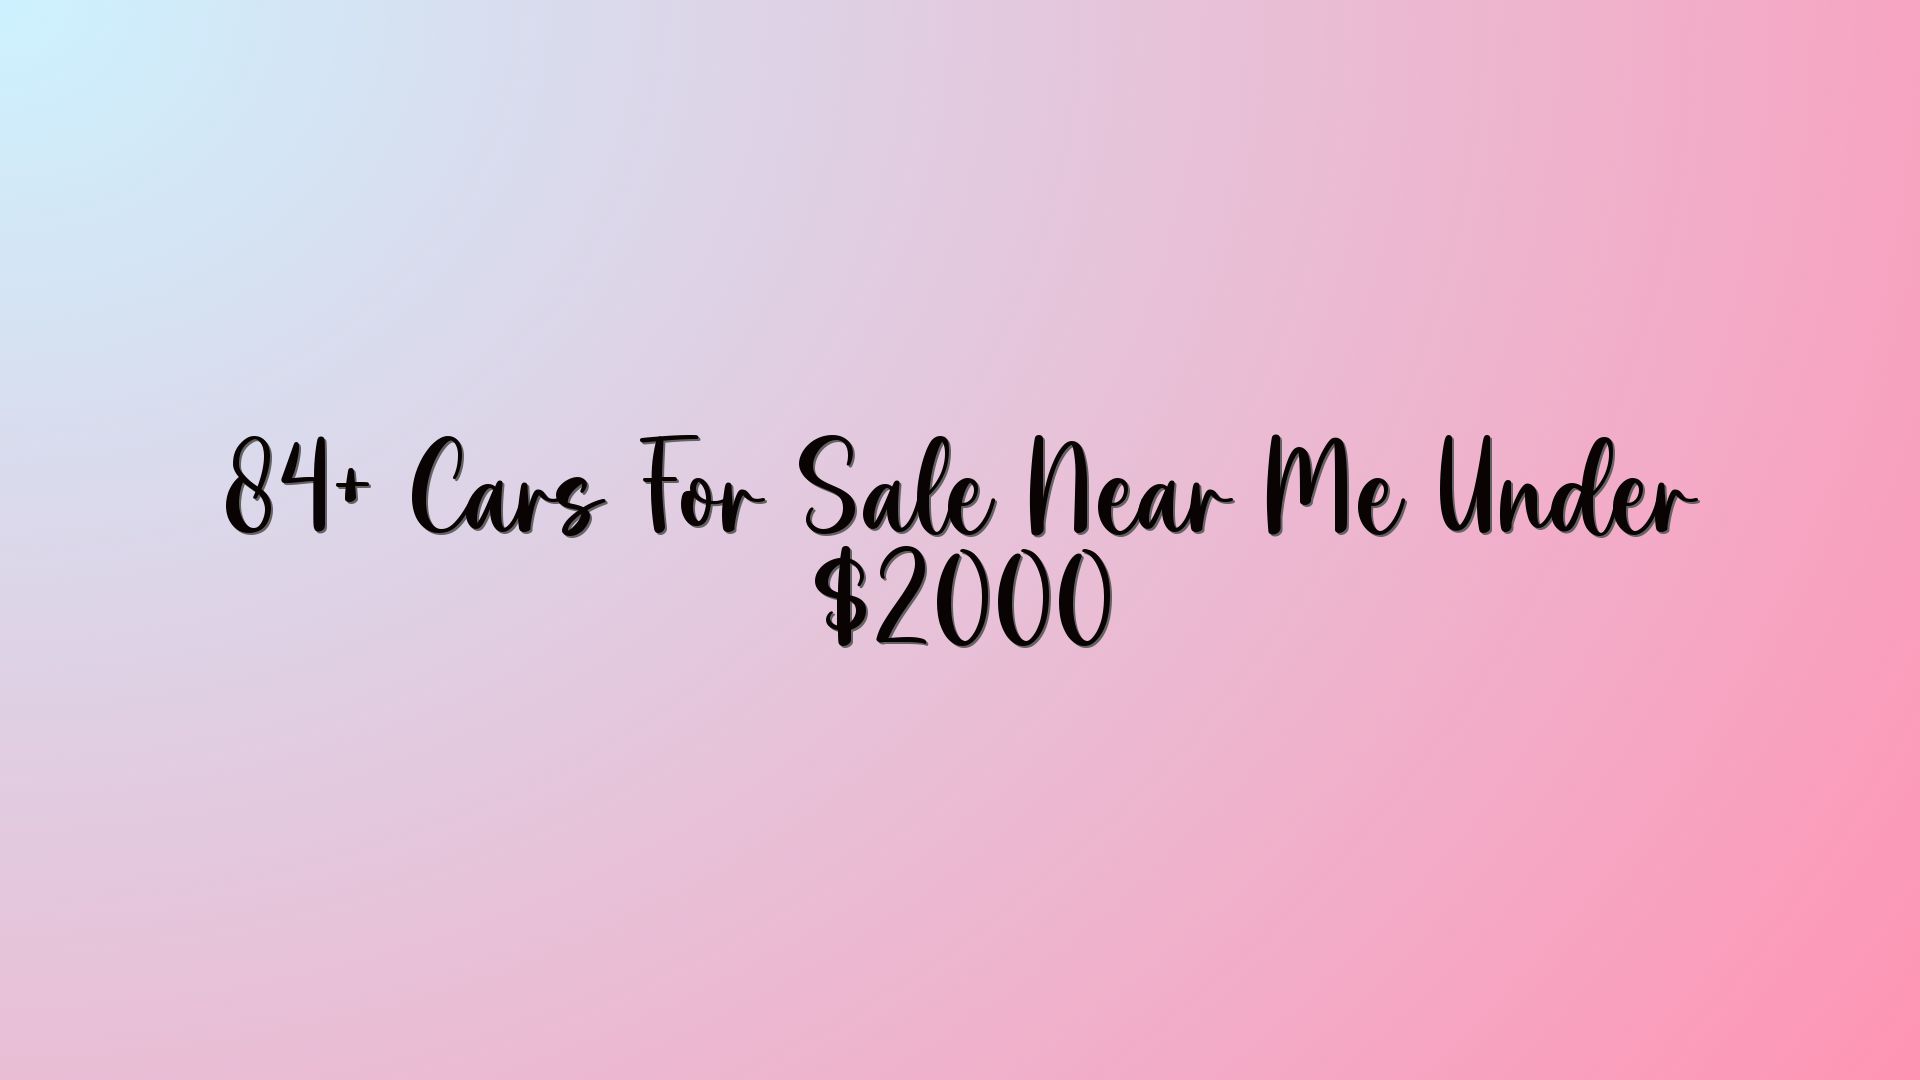 84+ Cars For Sale Near Me Under $2000